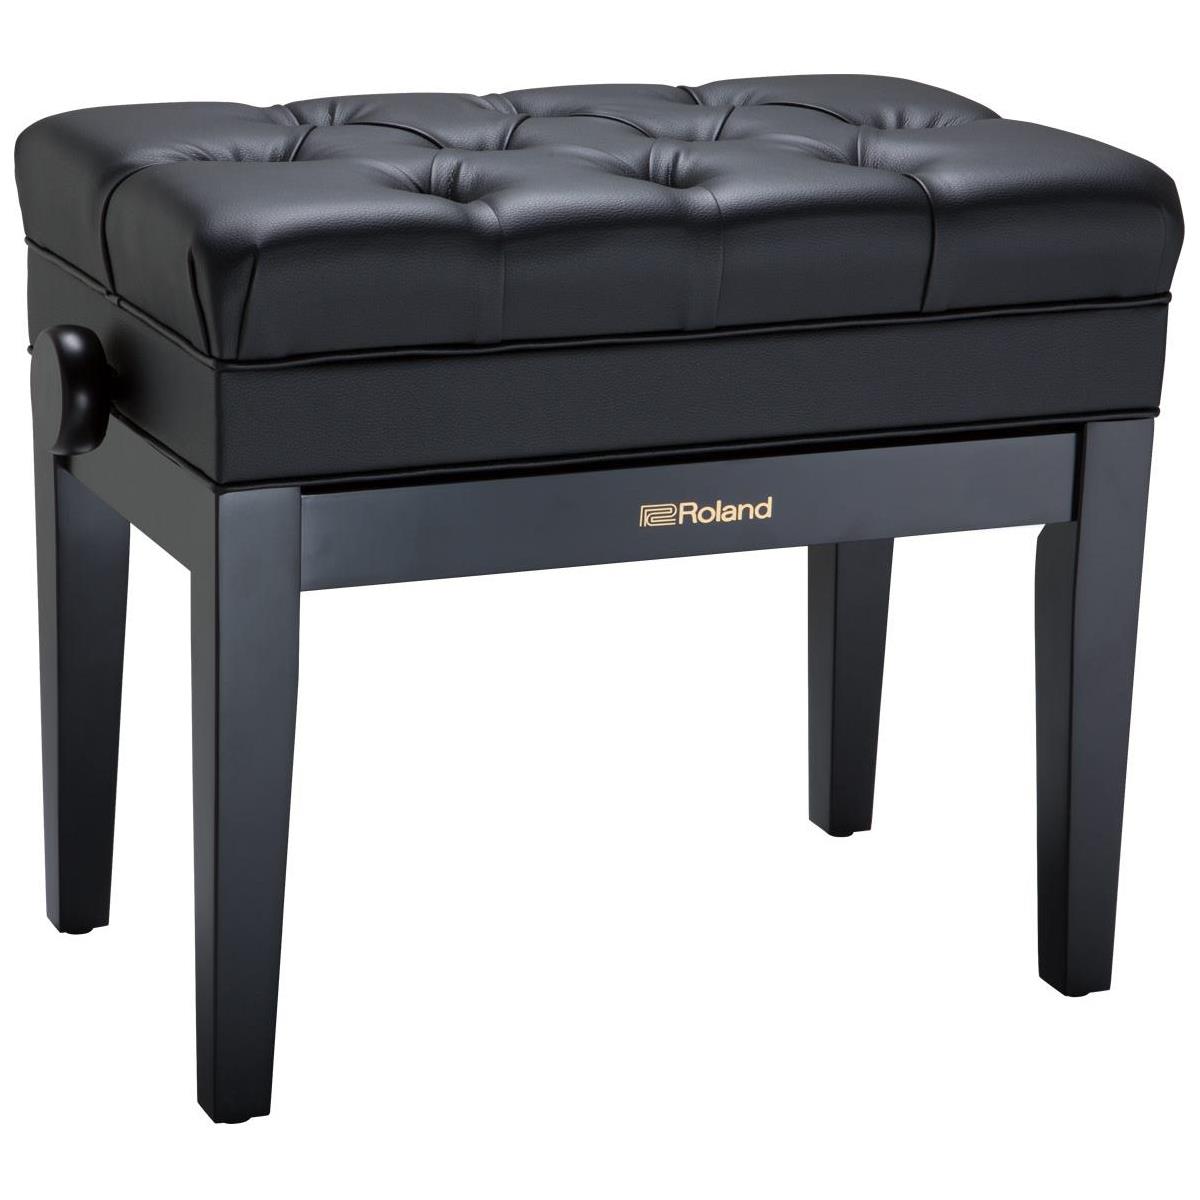 Image of Roland RPB-500 Piano Bench with Vinyl Seat &amp; Storage Compartment